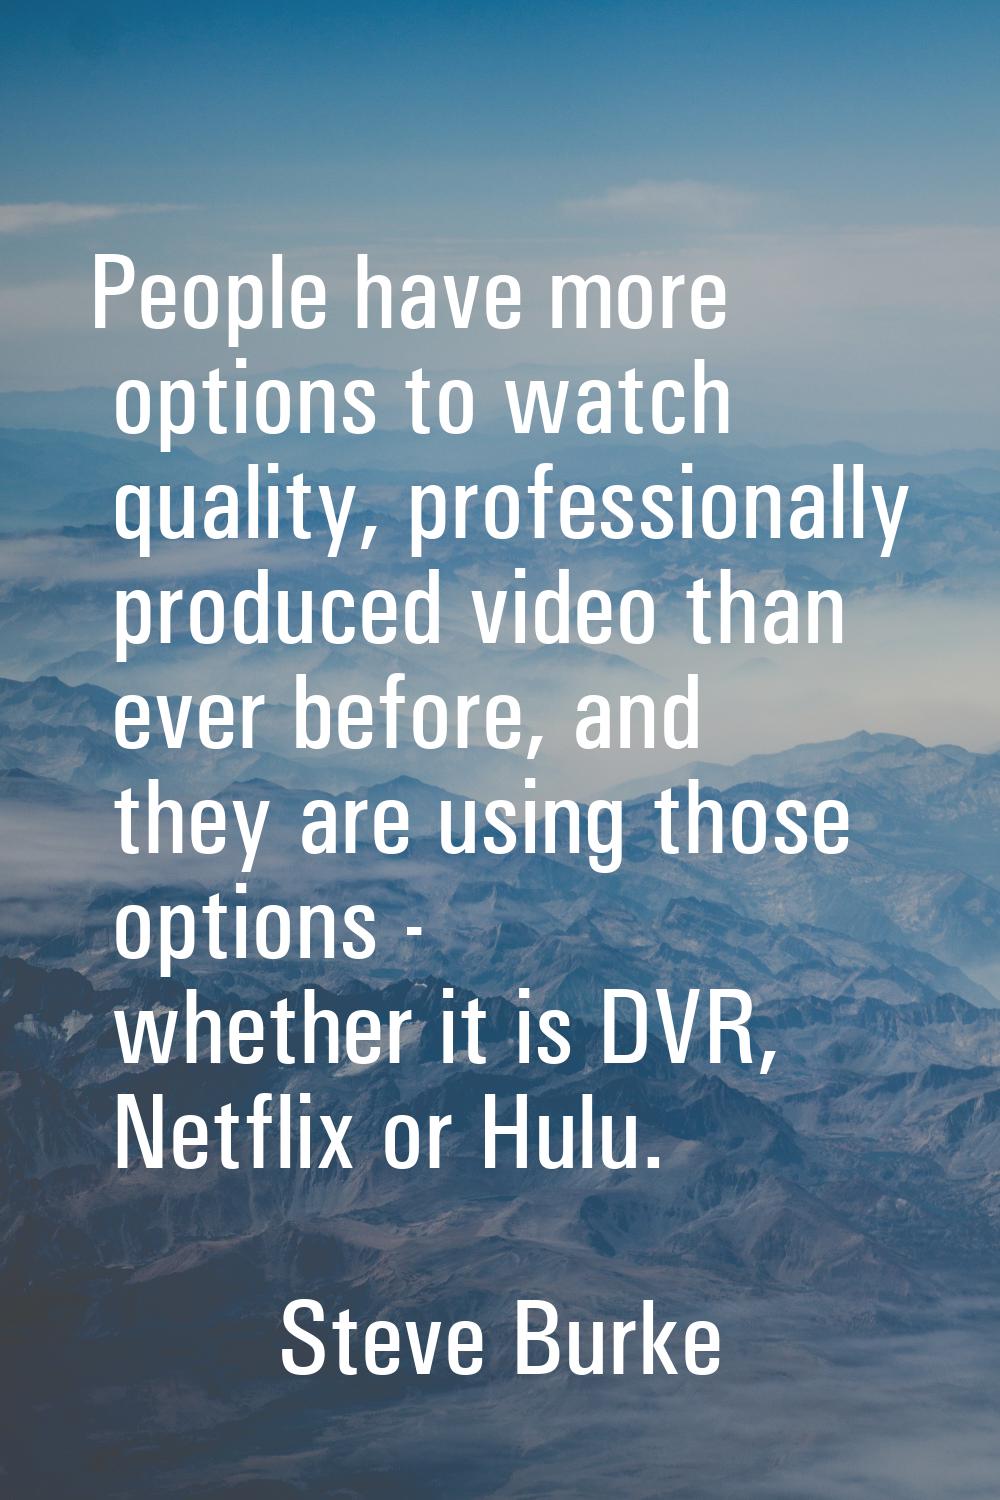 People have more options to watch quality, professionally produced video than ever before, and they